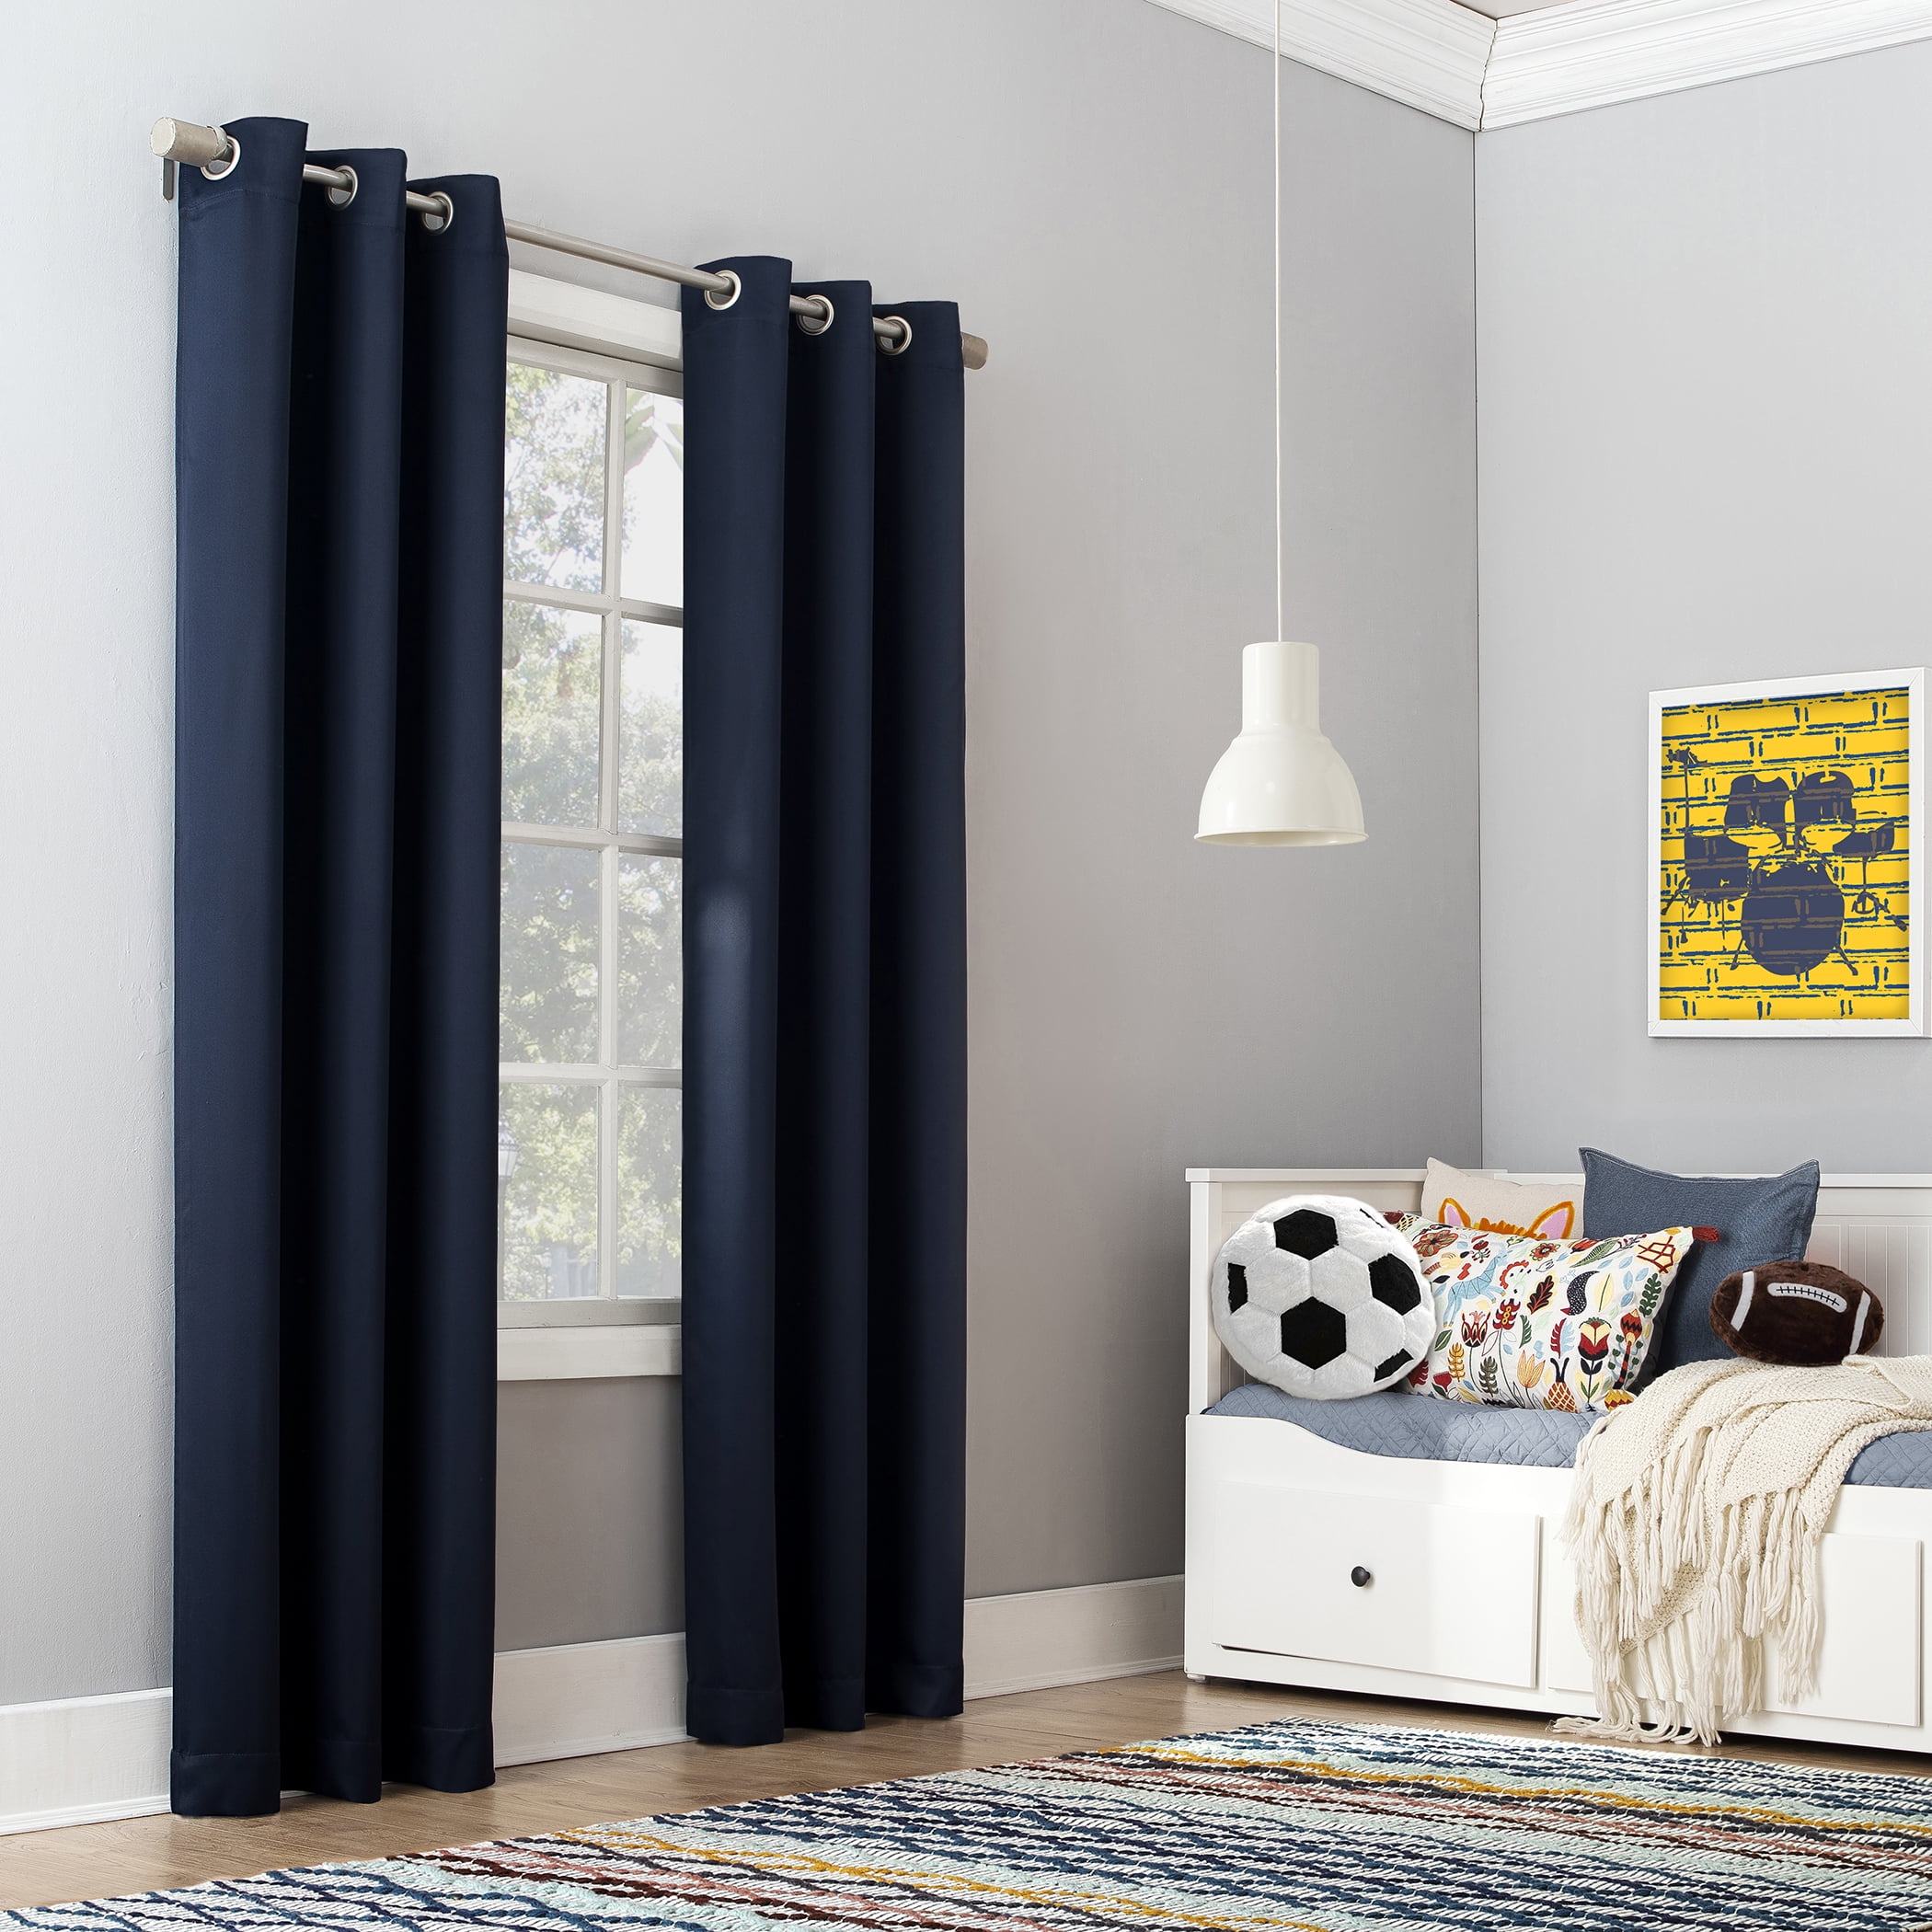 Details about   Kids Microfiber Curtains 2 Panel Set for Living Room Bedroom in 3 Sizes 